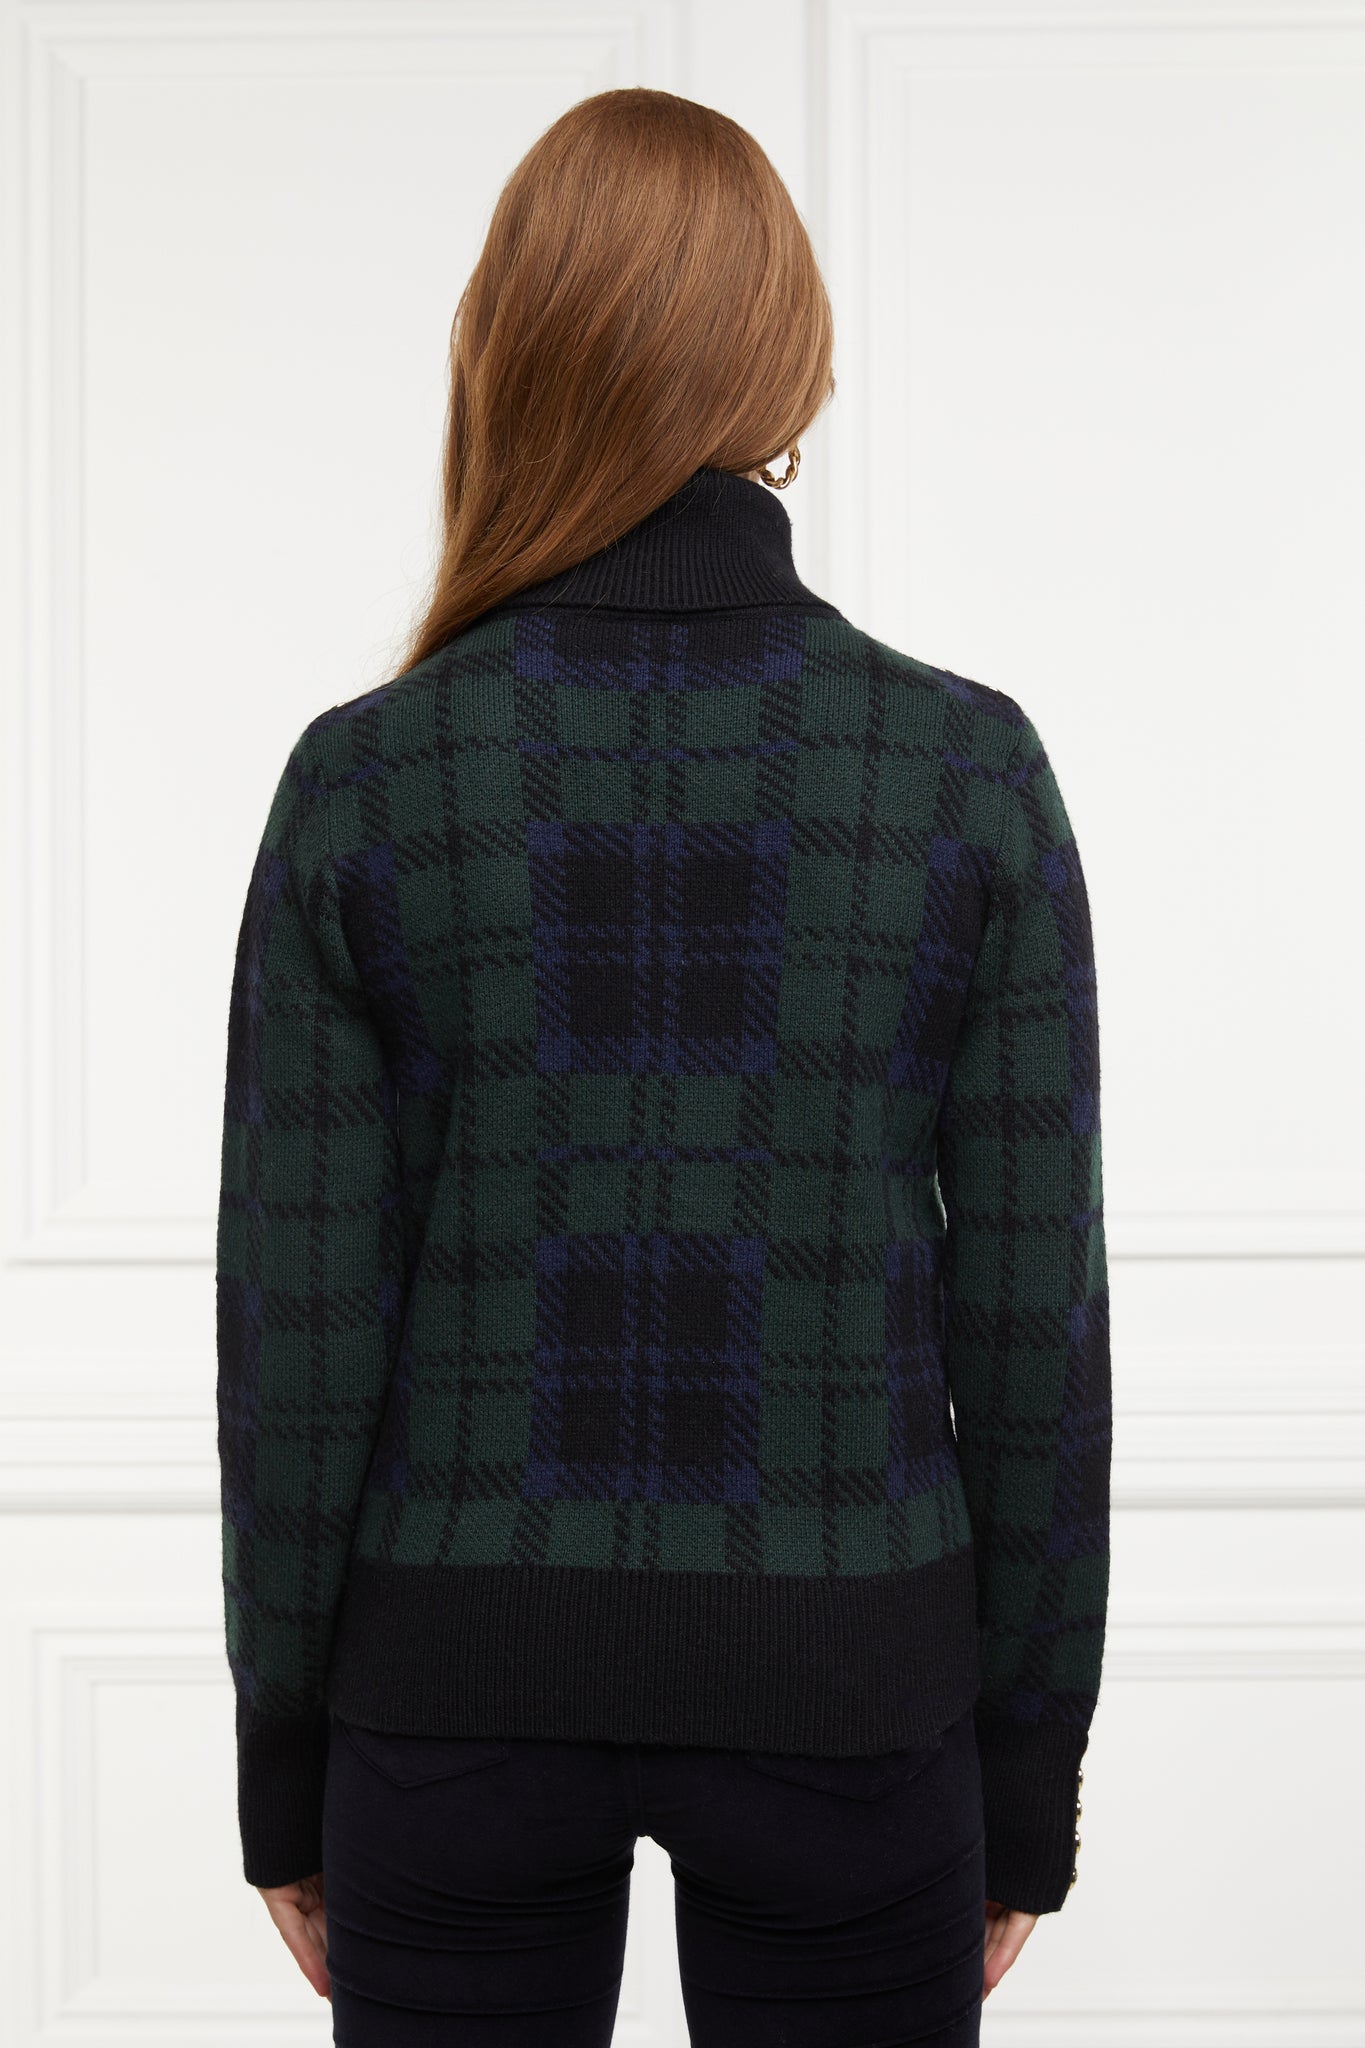 back of womens classic green navy and black blackwatch jumper with contrast black cuffs, roll neck and split ribbed hem with gold button detail on the cuffs and collar